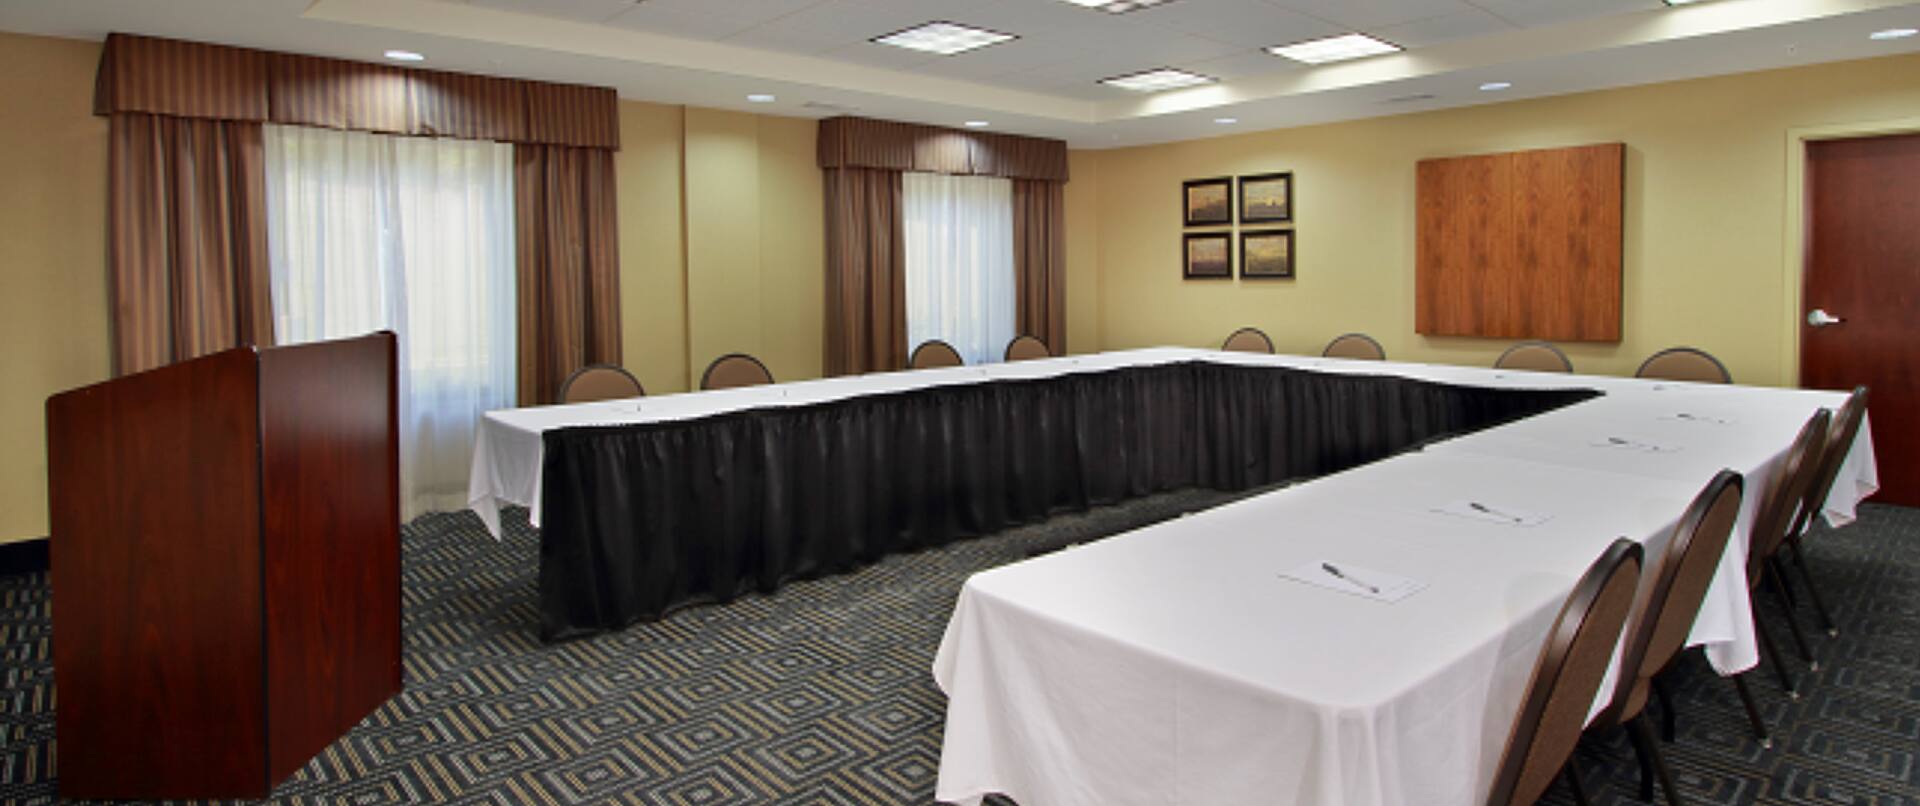 Meeting Room With Seating for 12 at U-Shaped Table and Podium